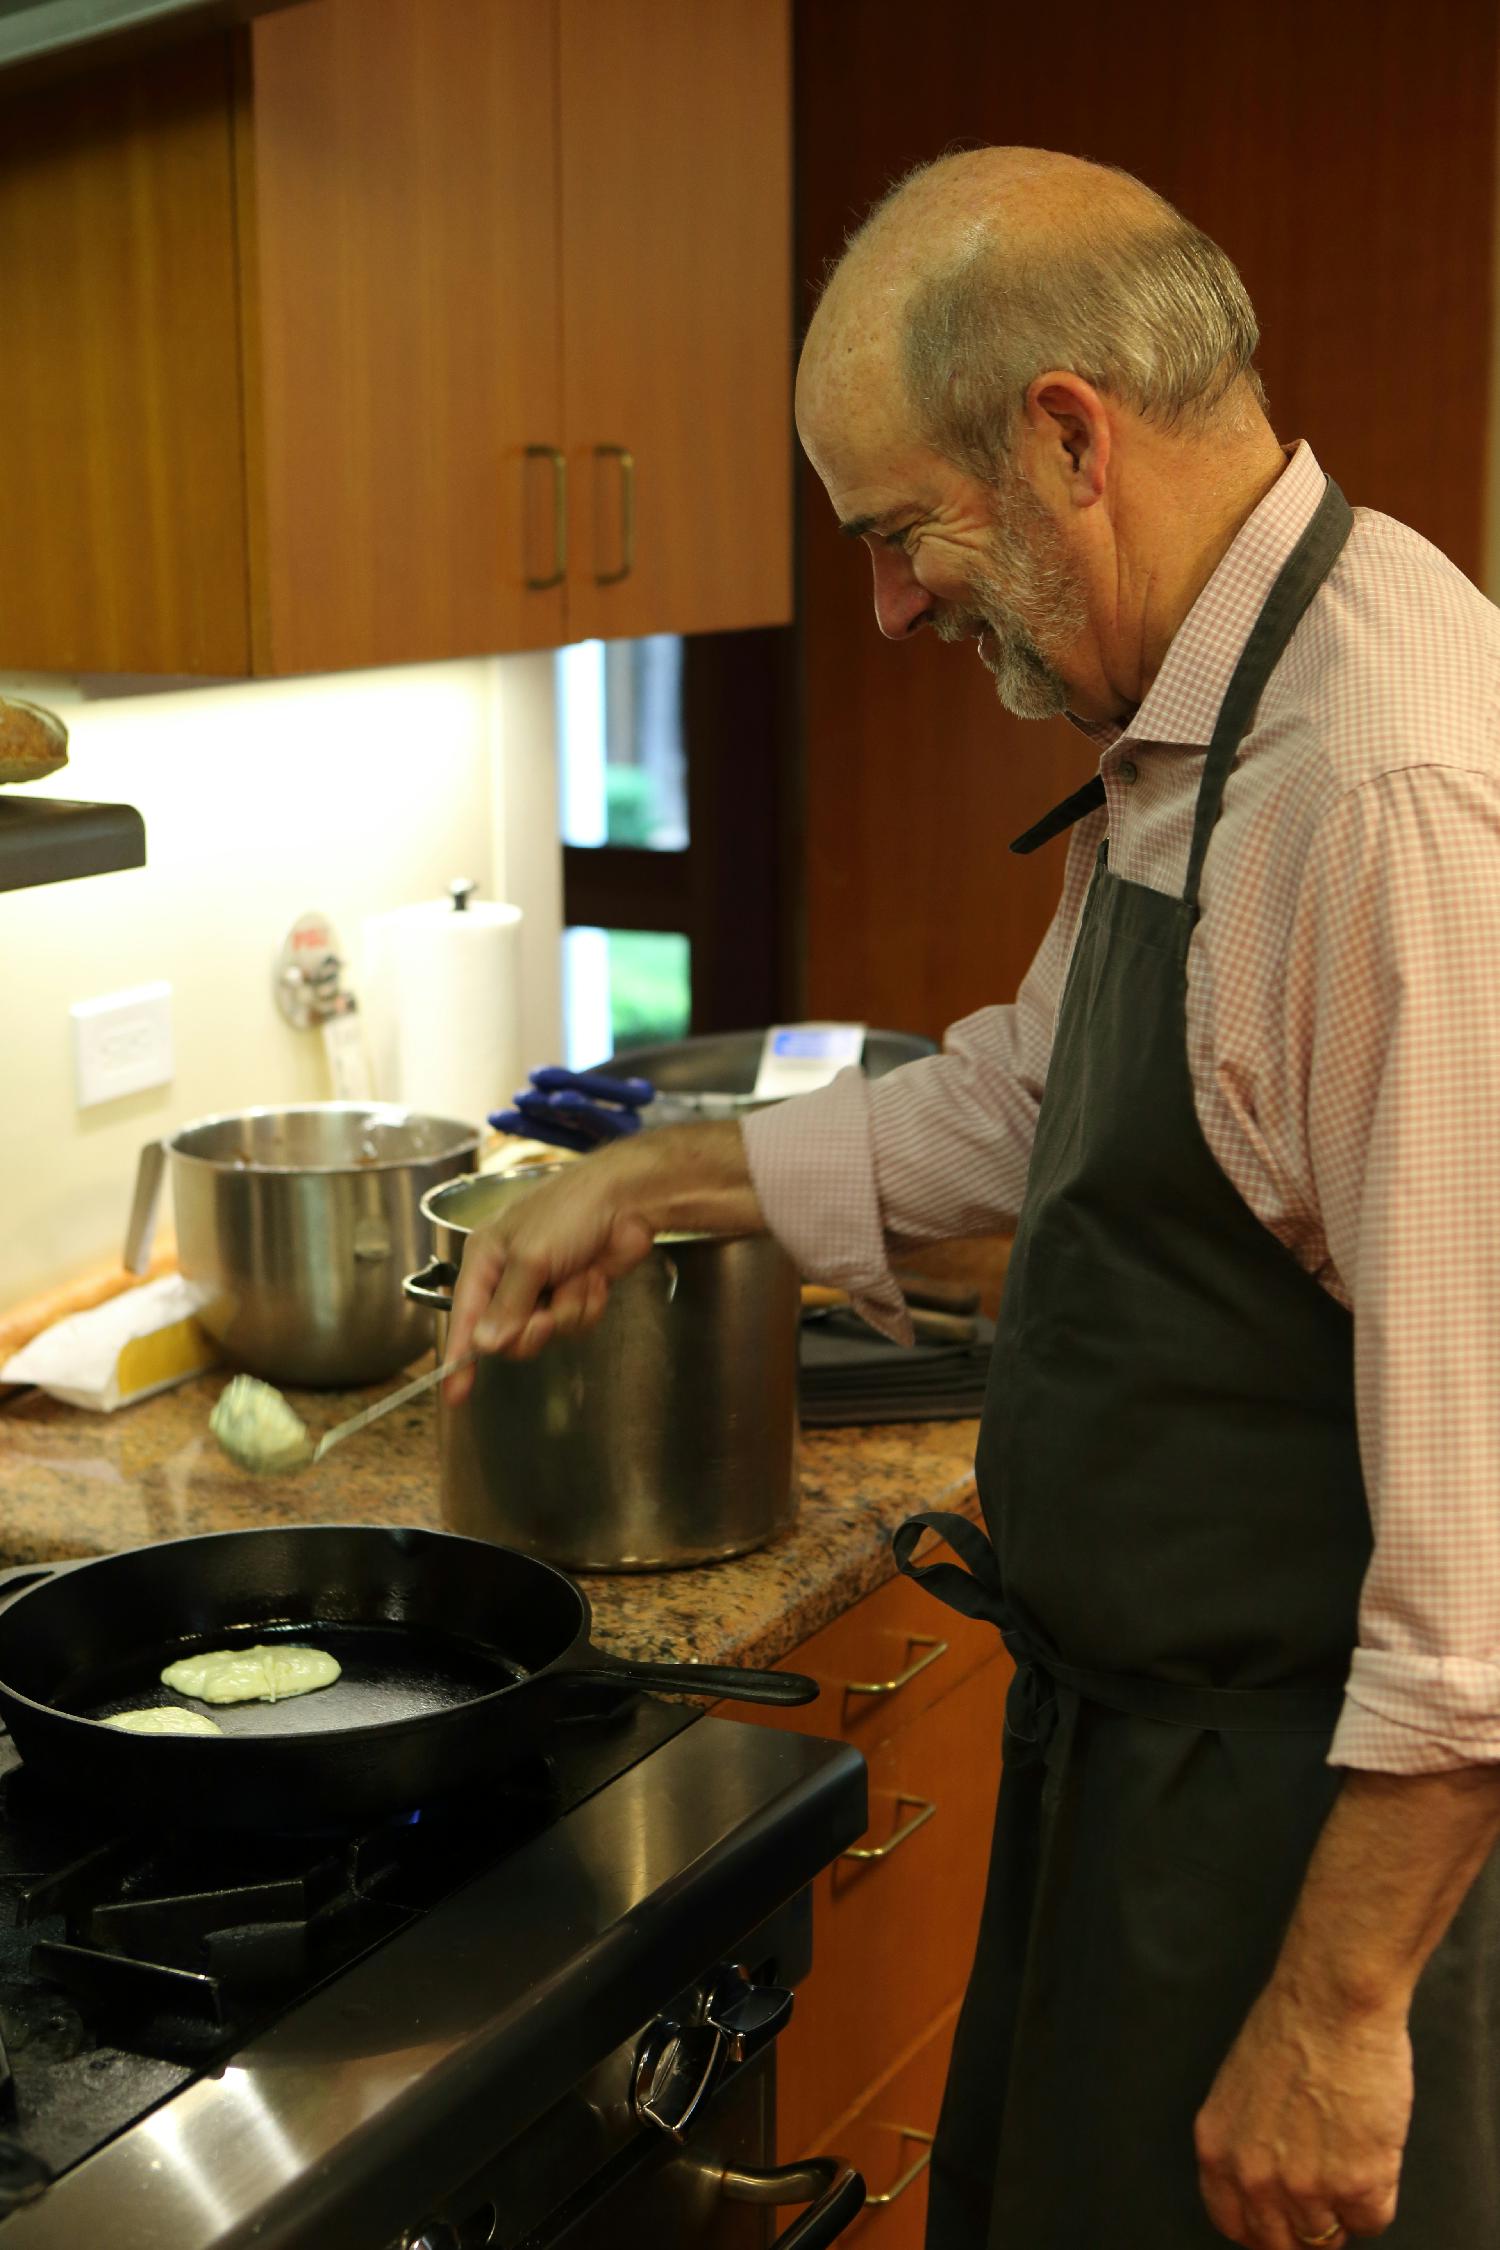 Co-Owner Bruce Cakebread flipping pancakes at the winery house for employees at our annual employee Pancake Breakfast.